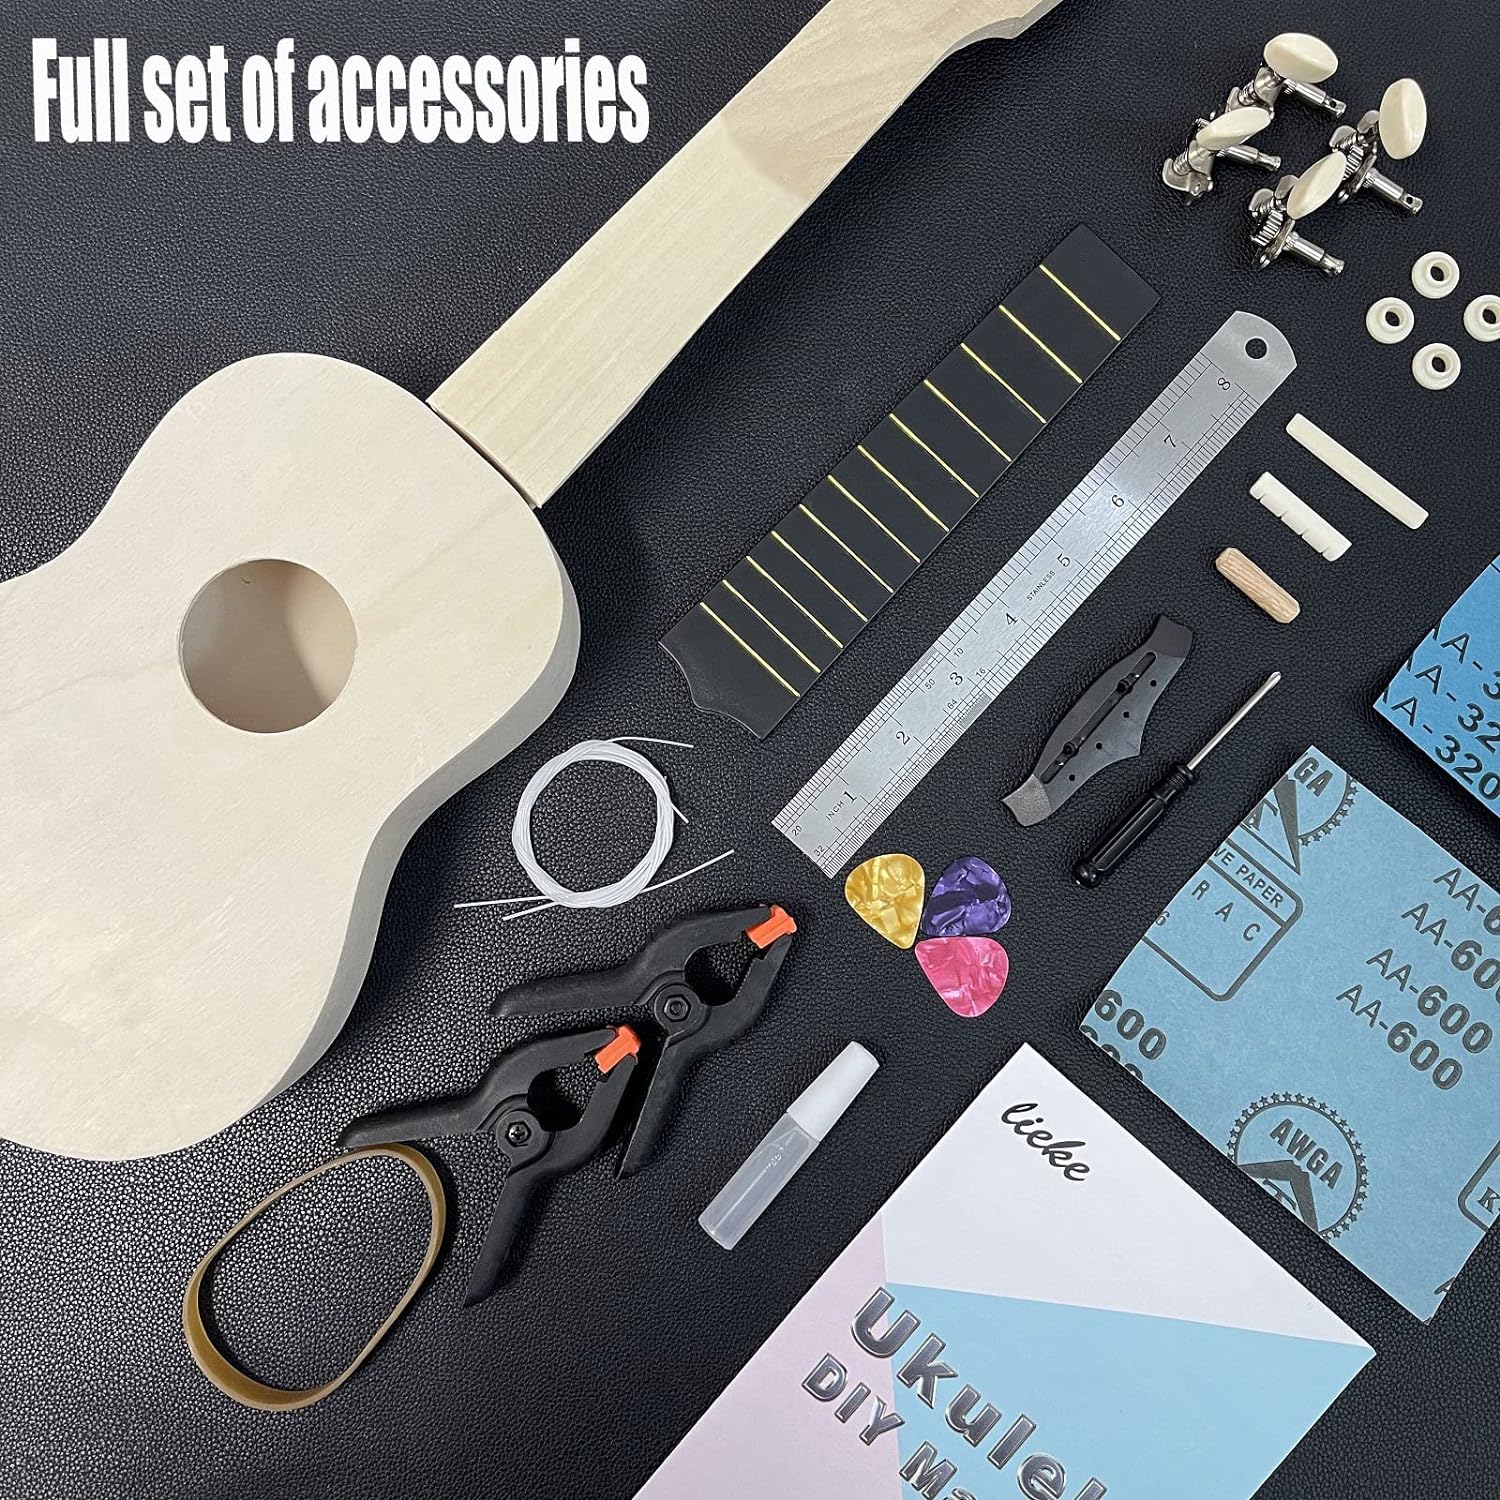 LIEKE DIY Ukulele kit with Assembly Manual and All Accessories,Build Your Own ukelele Instrument Gifts for Kids Adult